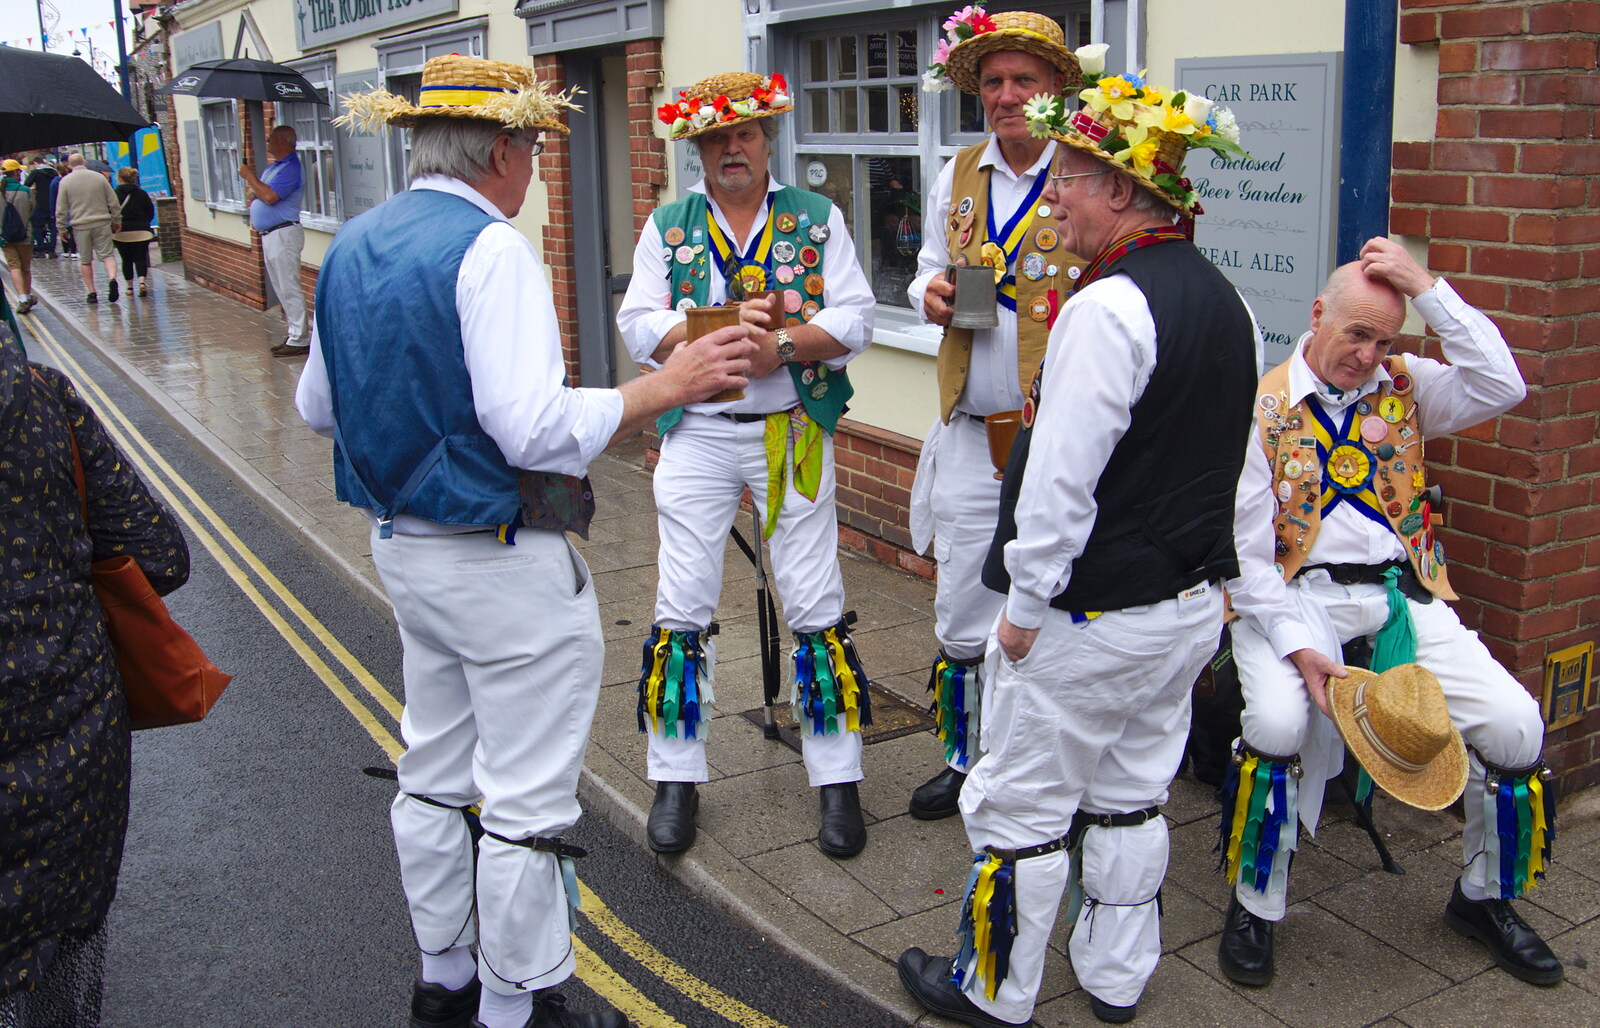 Some Morris lads have a beer from Kelling Camping and the Potty Morris Festival, Sheringham, North Norfolk - 6th July 2019